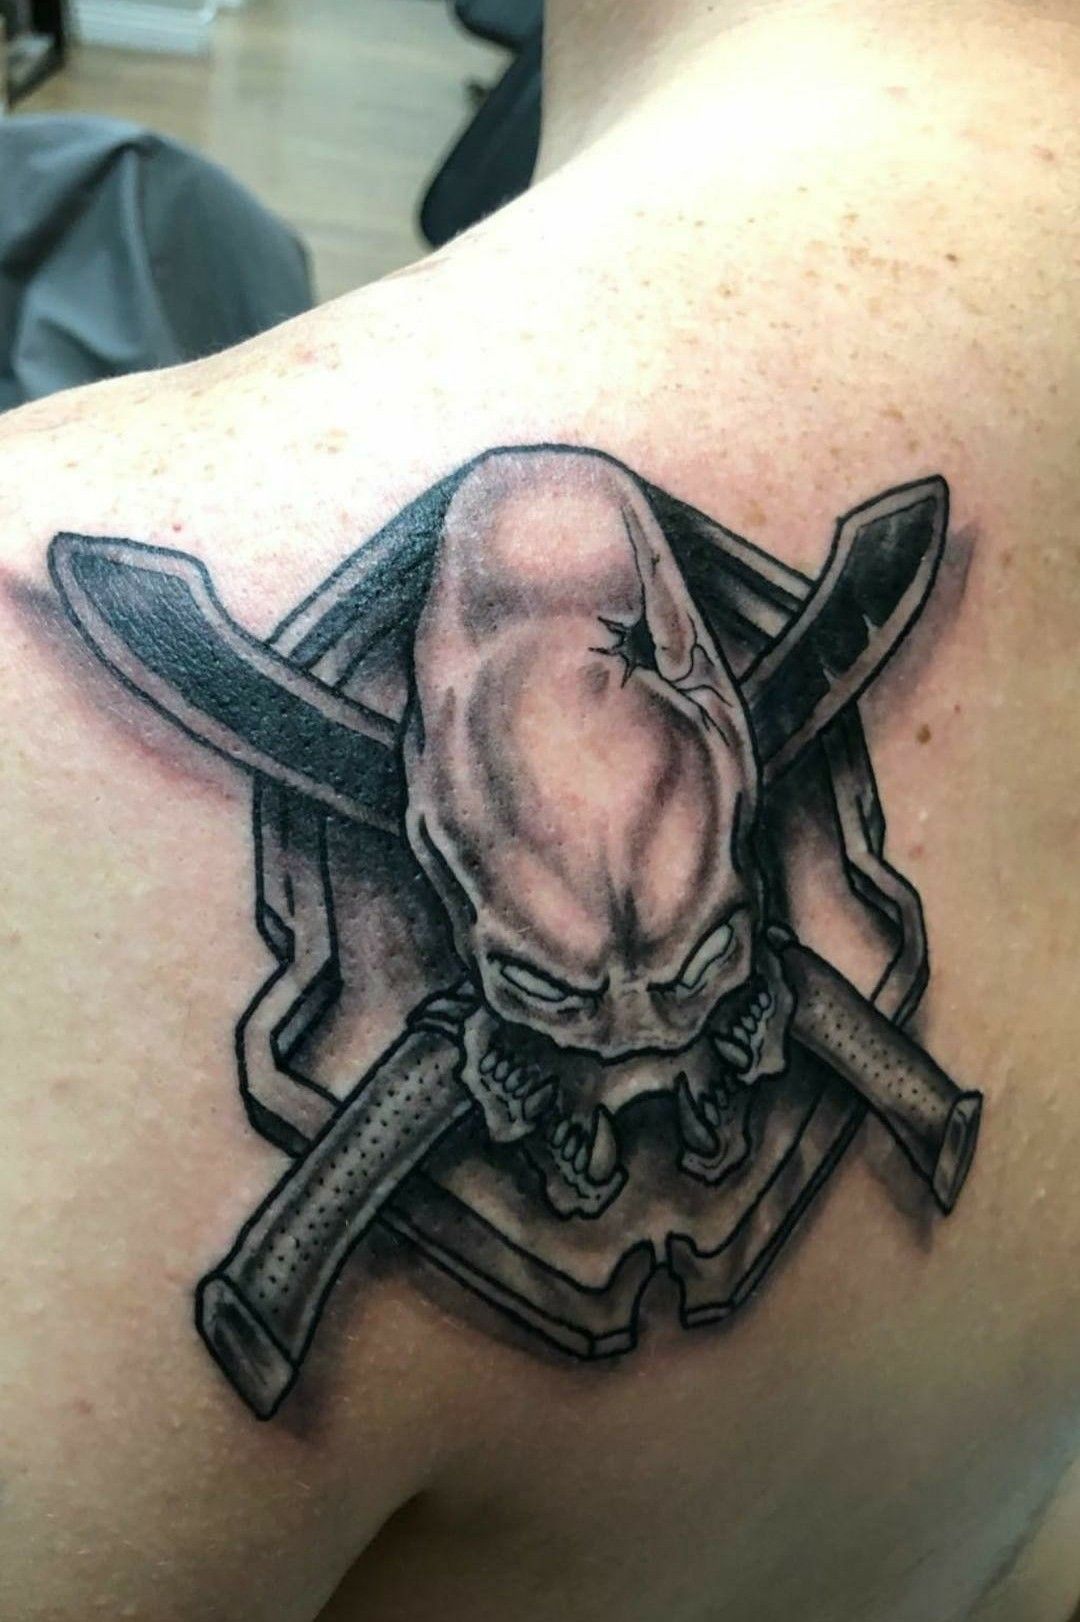 Jack Chapman on Twitter Recently commissioned a traditional tattoo style  rendition of the Halo Legendary symbol from James Shannon Looks absolutely  beautiful Go check out the guys work hes insanehttpstcoSYqM5HpTMk  httpstcoENmHrawULa 